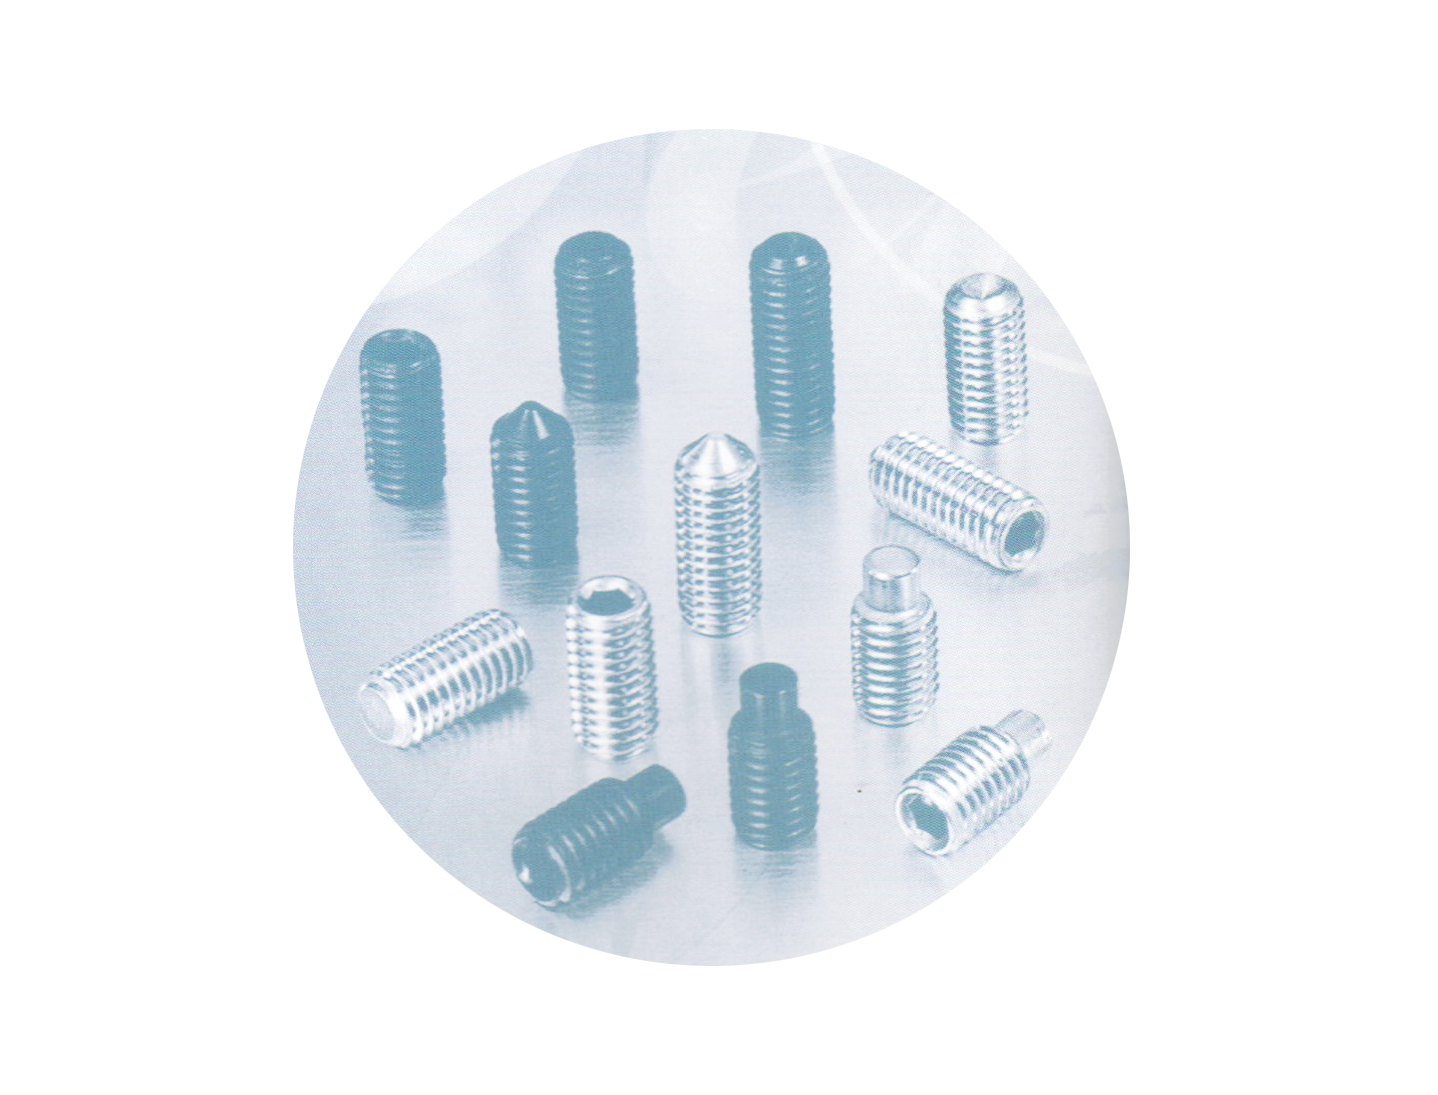 Hexagon socket set screw with flat point / Hexagon socket set screw with cone point / Hexagon socket set screw with dog point / Hexagon socket set screw with cup point